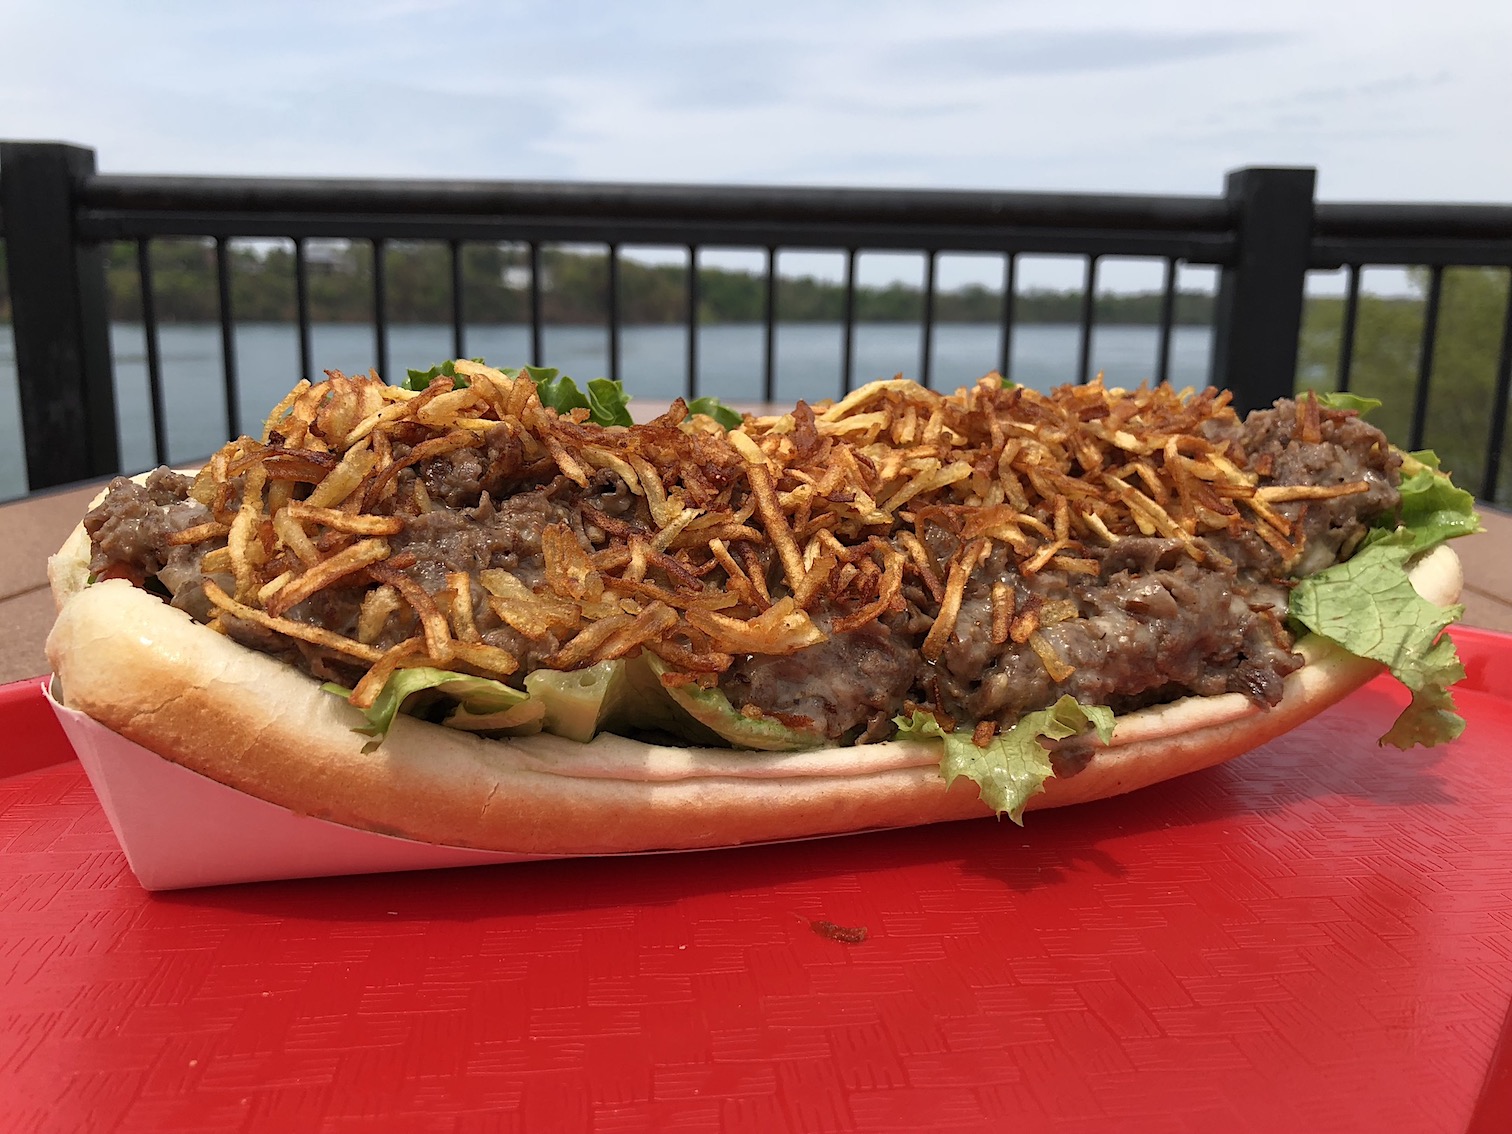 The Silo Restaurant's signature `HayStinger` sandwich. It's a ribeye steak and cheese sandwich ... with crispy potato strings ... and chicken fingers.